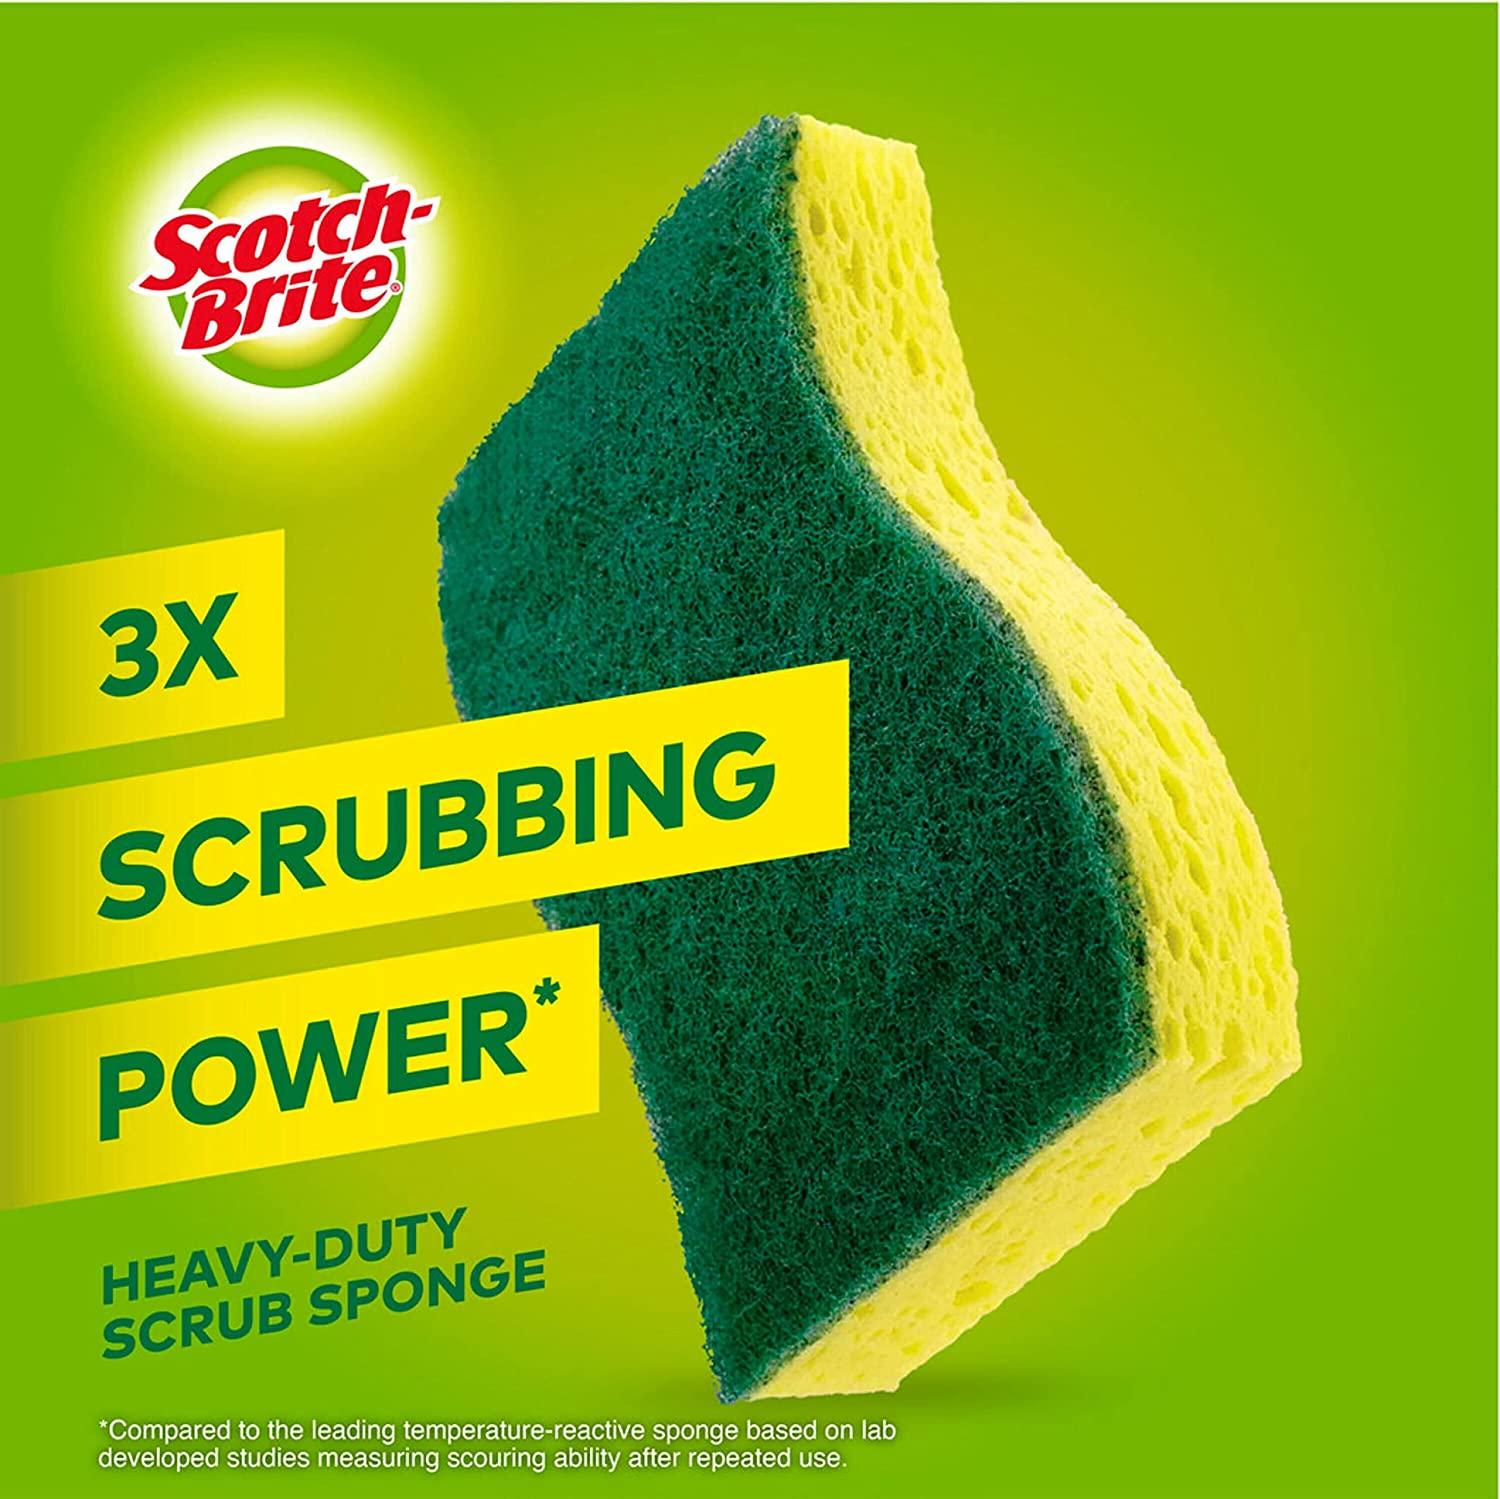 Scotch-Brite Heavy Duty Scrub Sponges, Sponges for Cleaning Kitchen and  Household, Heavy Duty Sponges Safe for Non-Coated Cookware, 6 Scrubbing